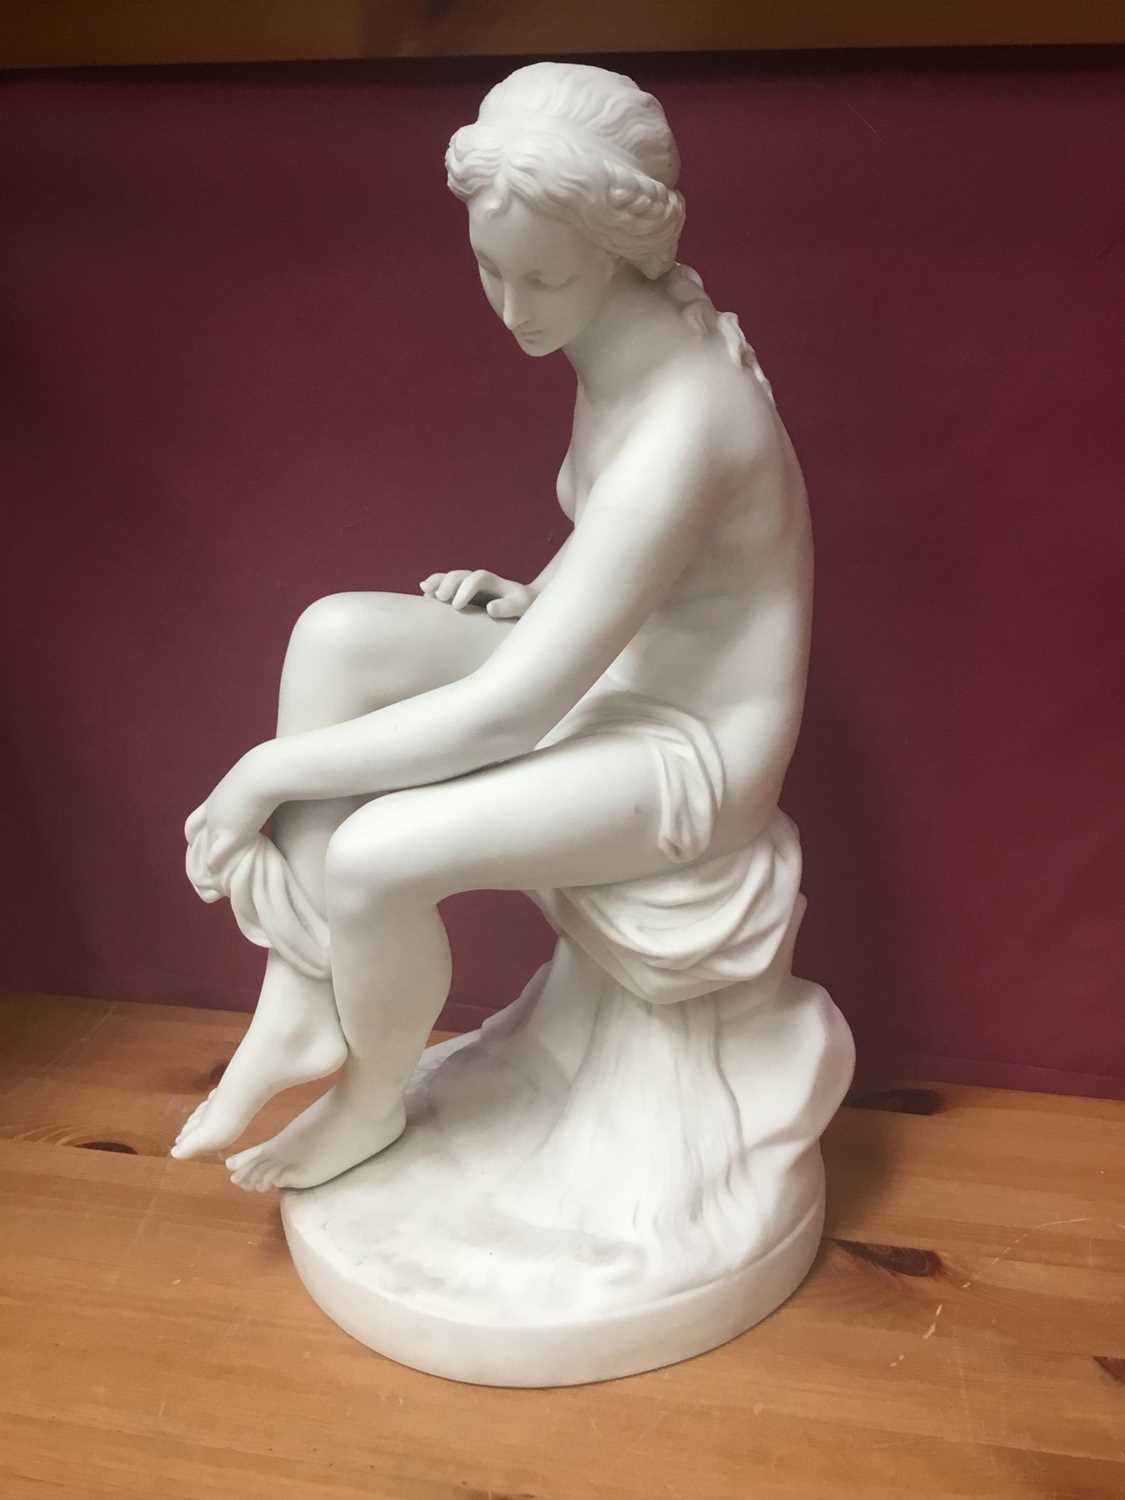 19th century Parian porcelain sculpture of seated female nude, approximately 38cm. - Image 3 of 5